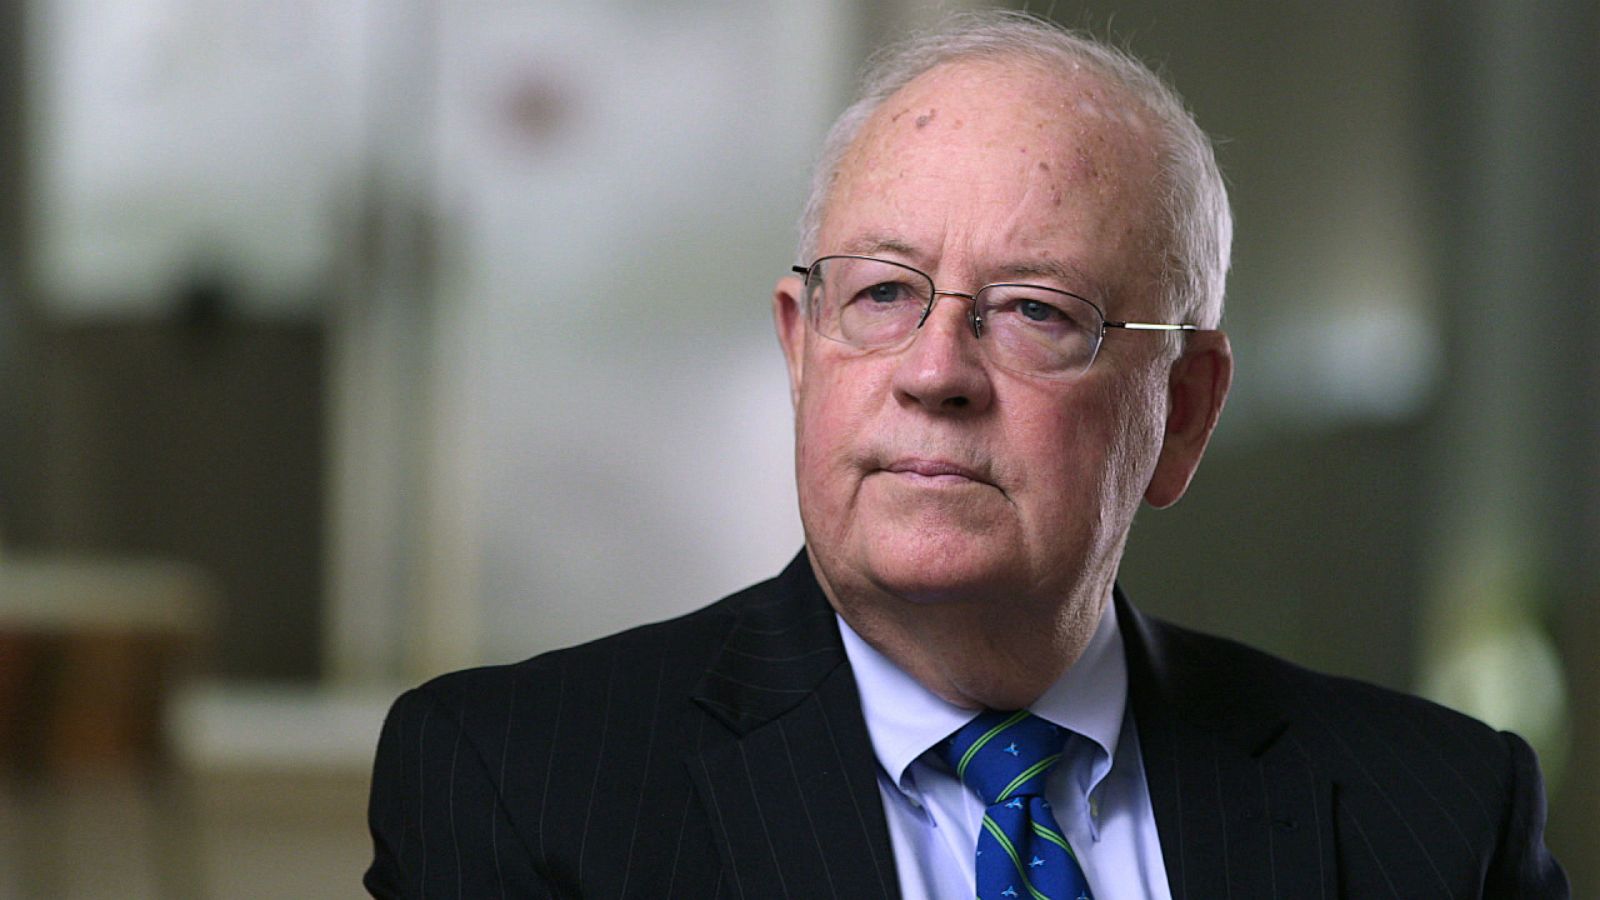 What is Wrong with ken starr